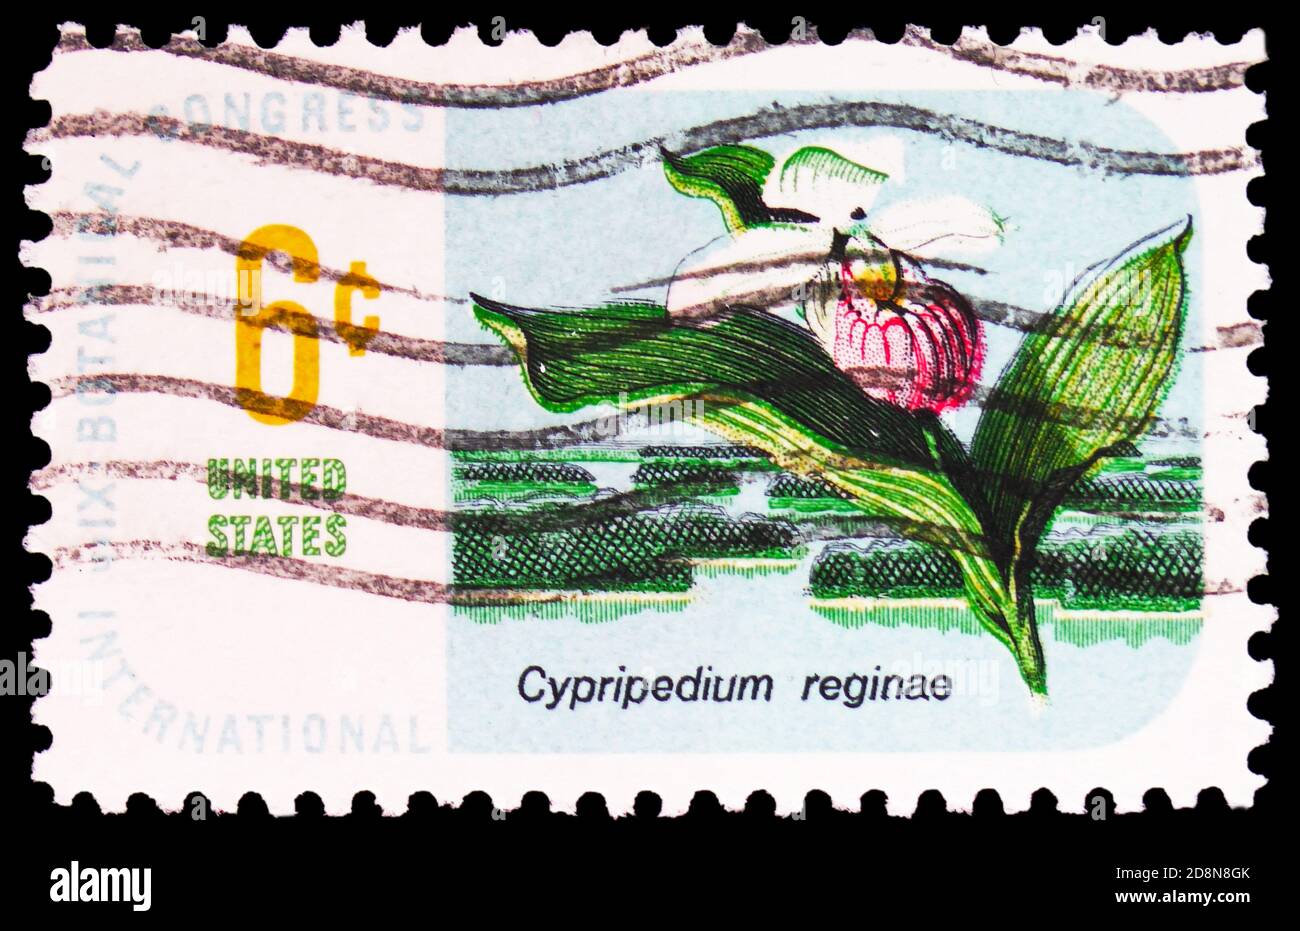 MOSCOW, RUSSIA - OCTOBER 8, 2020: Postage stamp printed in United States shows Cypripedium reginae - Showy Lady's-slipper, Botanical Congress Issue se Stock Photo